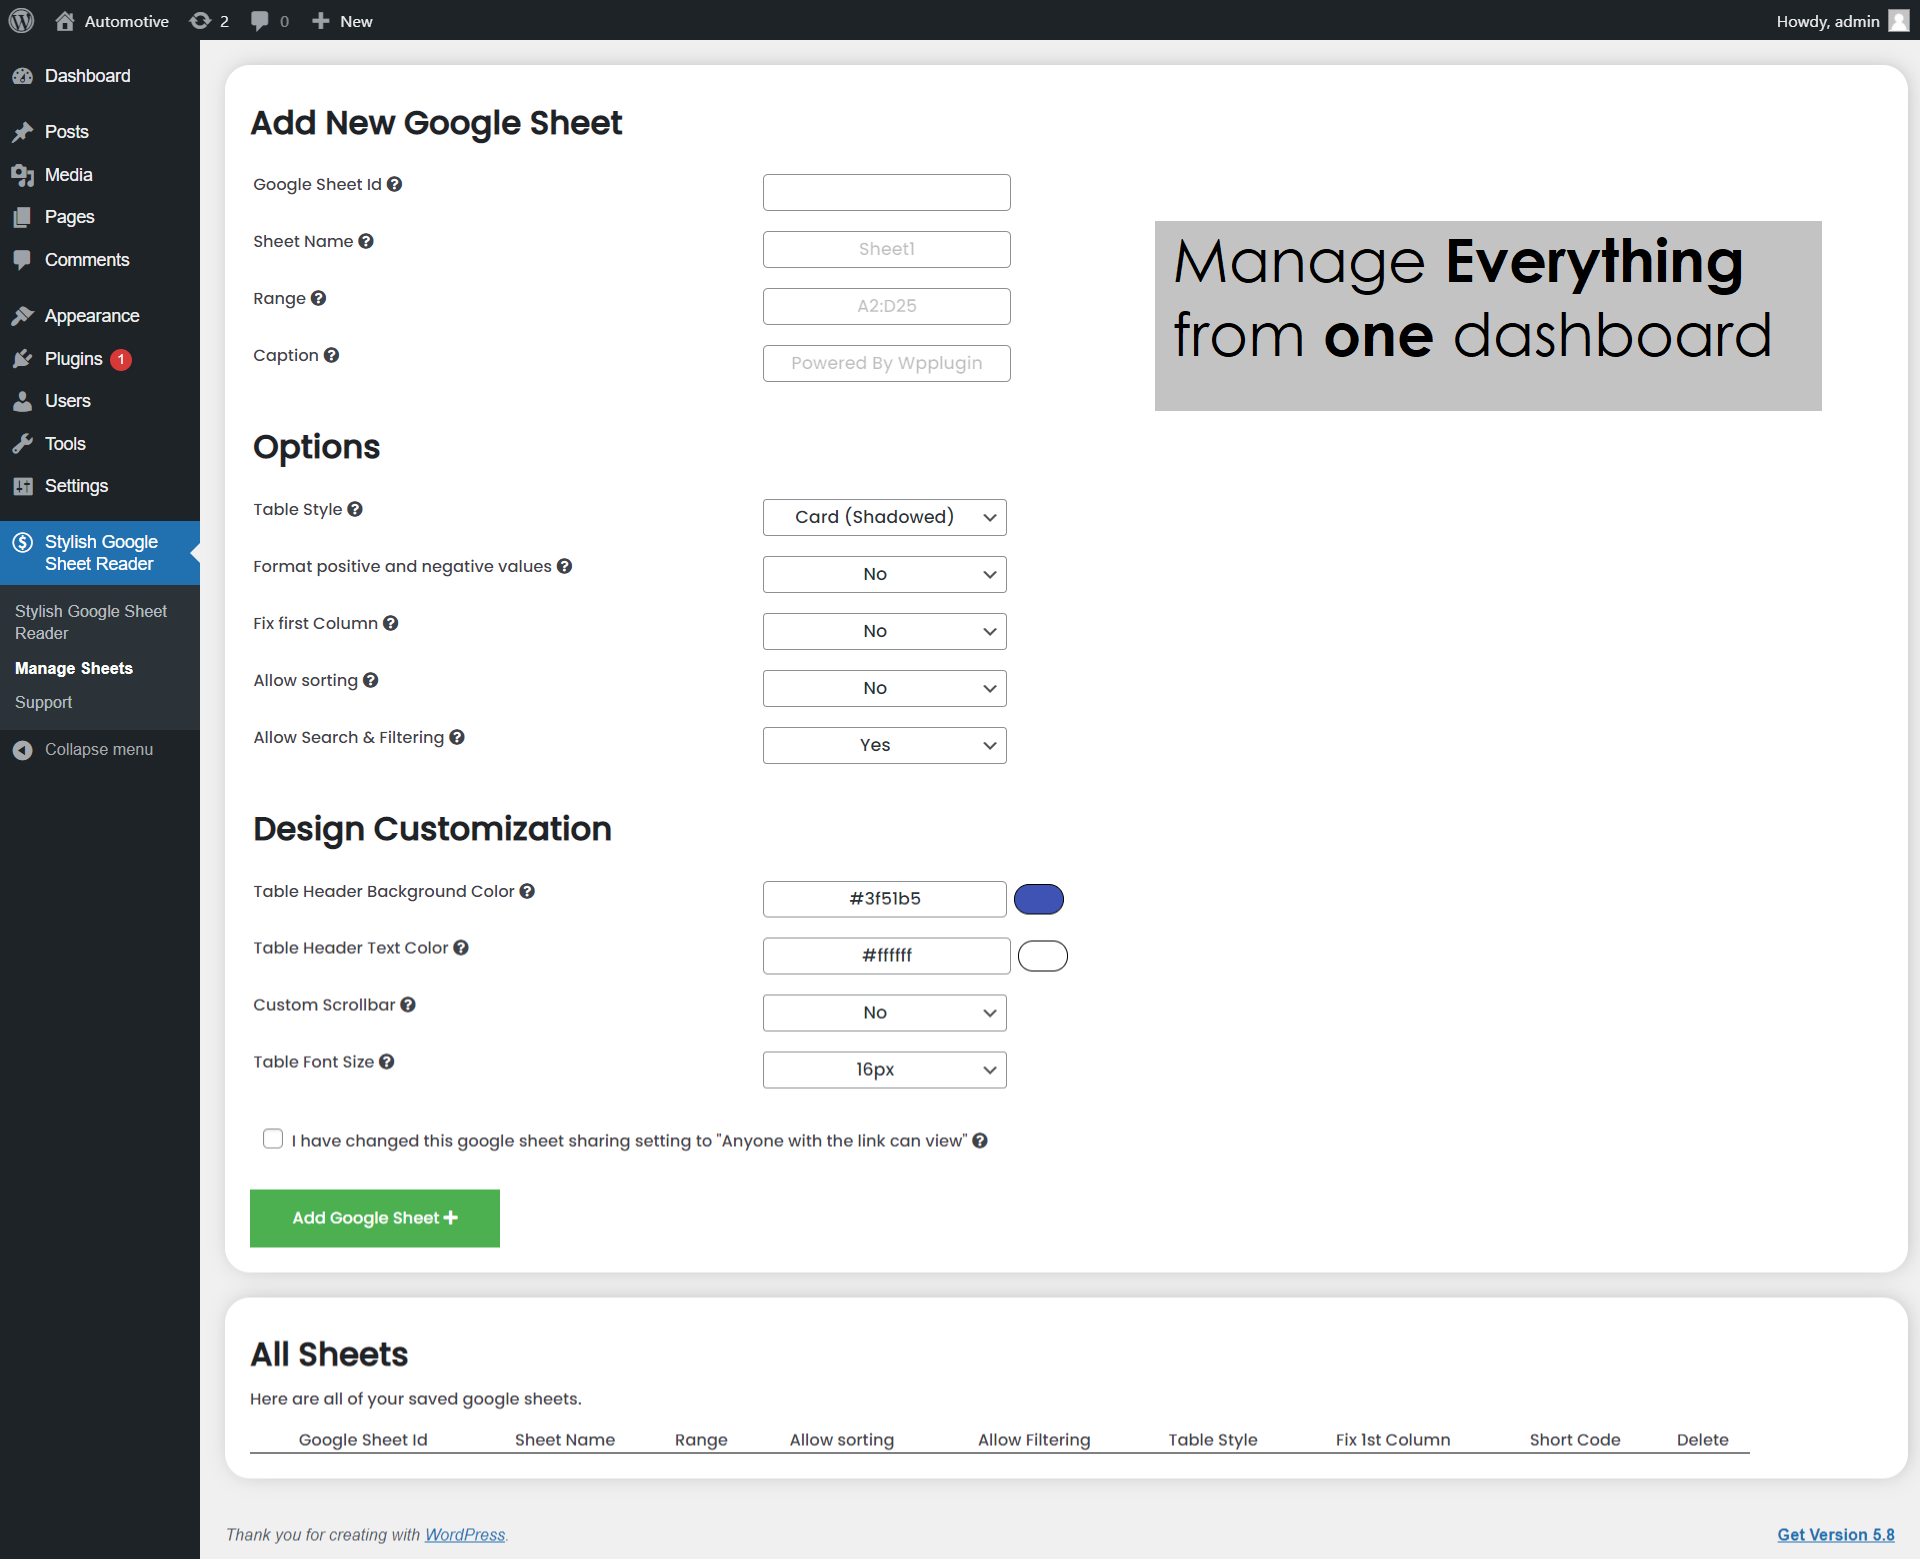 Manage all google sheets from one dashboard.